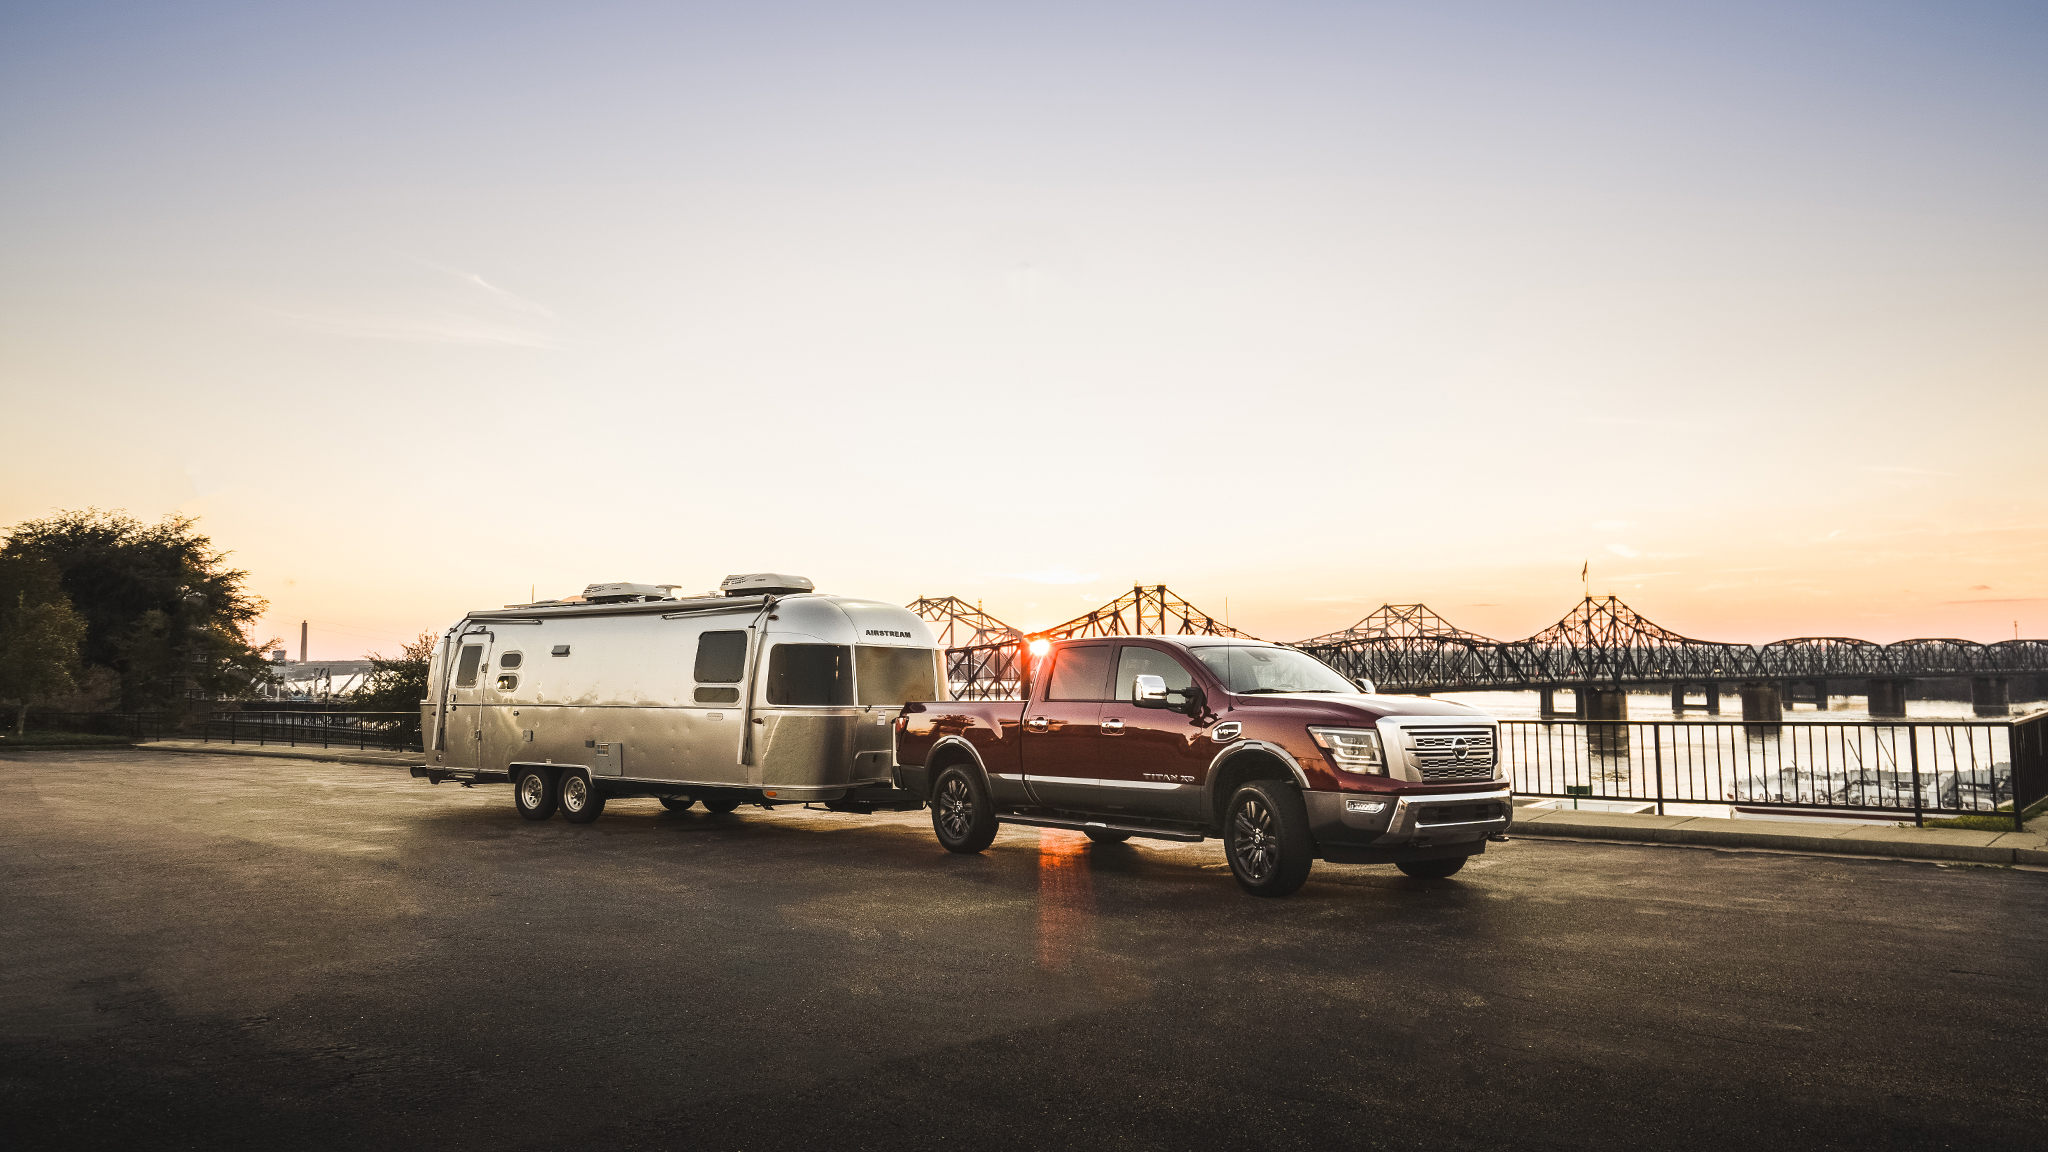 Wild Ford camper concept explores new style of work-from-anywhere RV